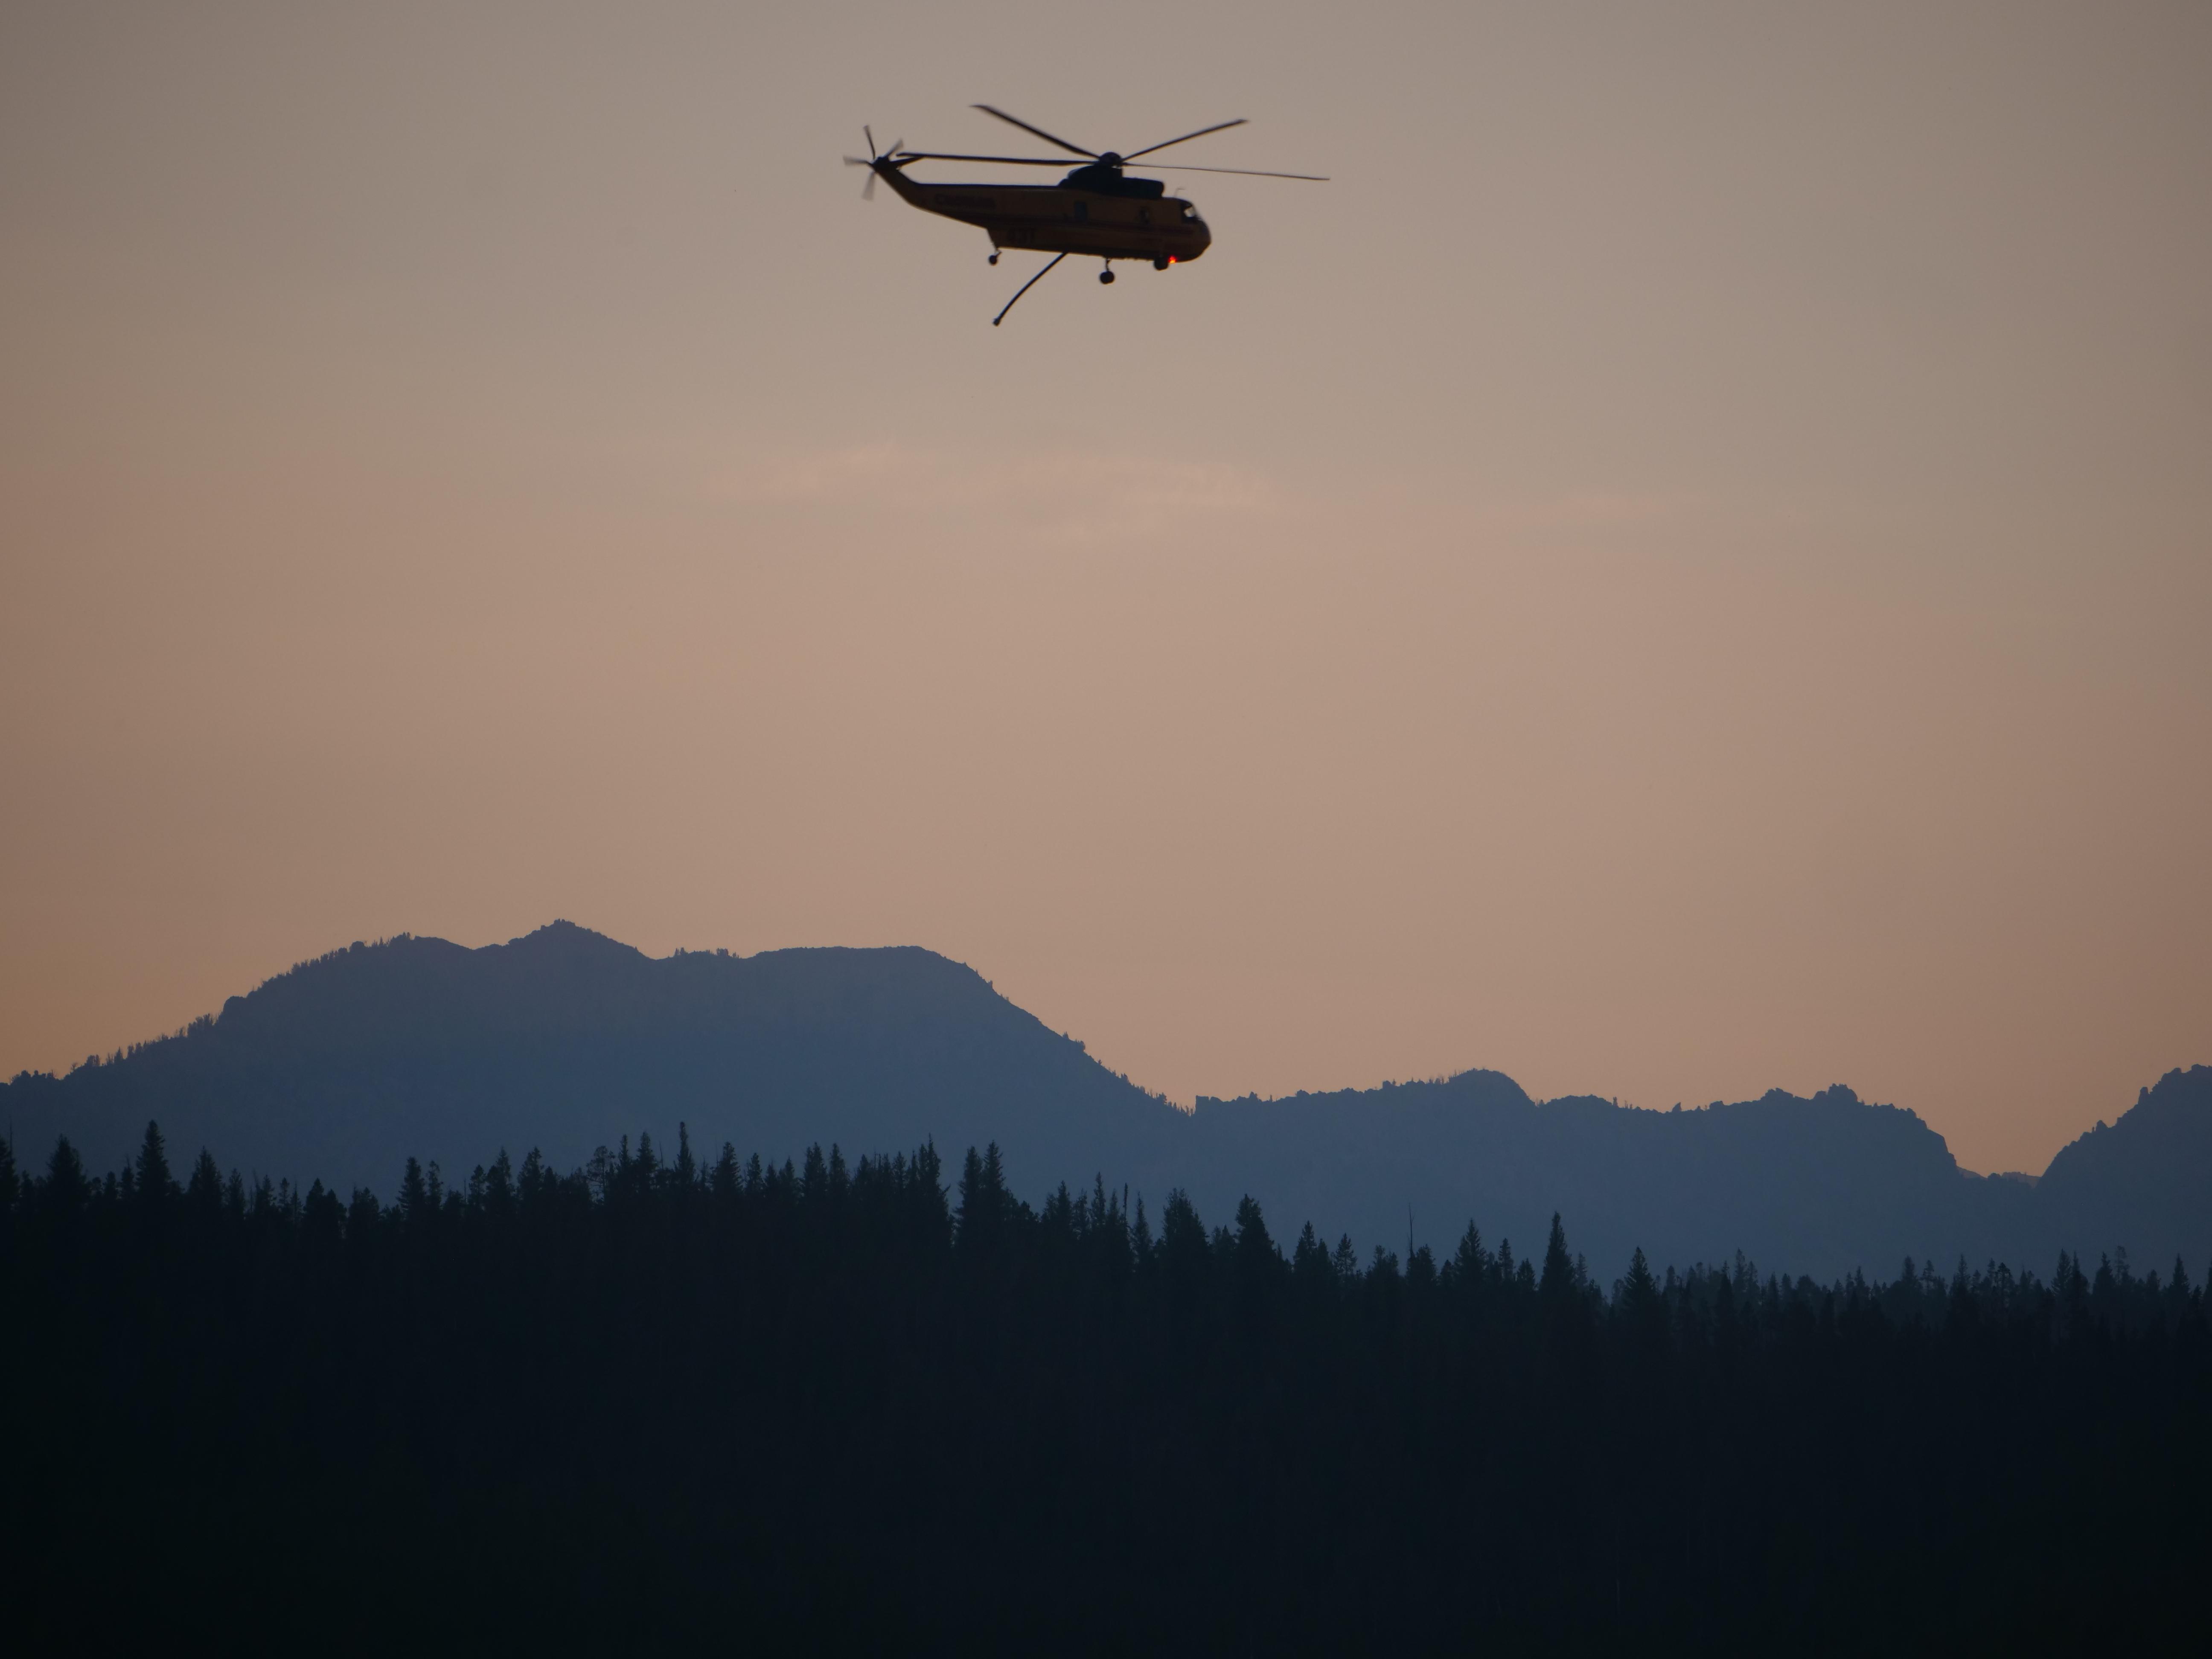 A helicopter flies past mountains at sunset